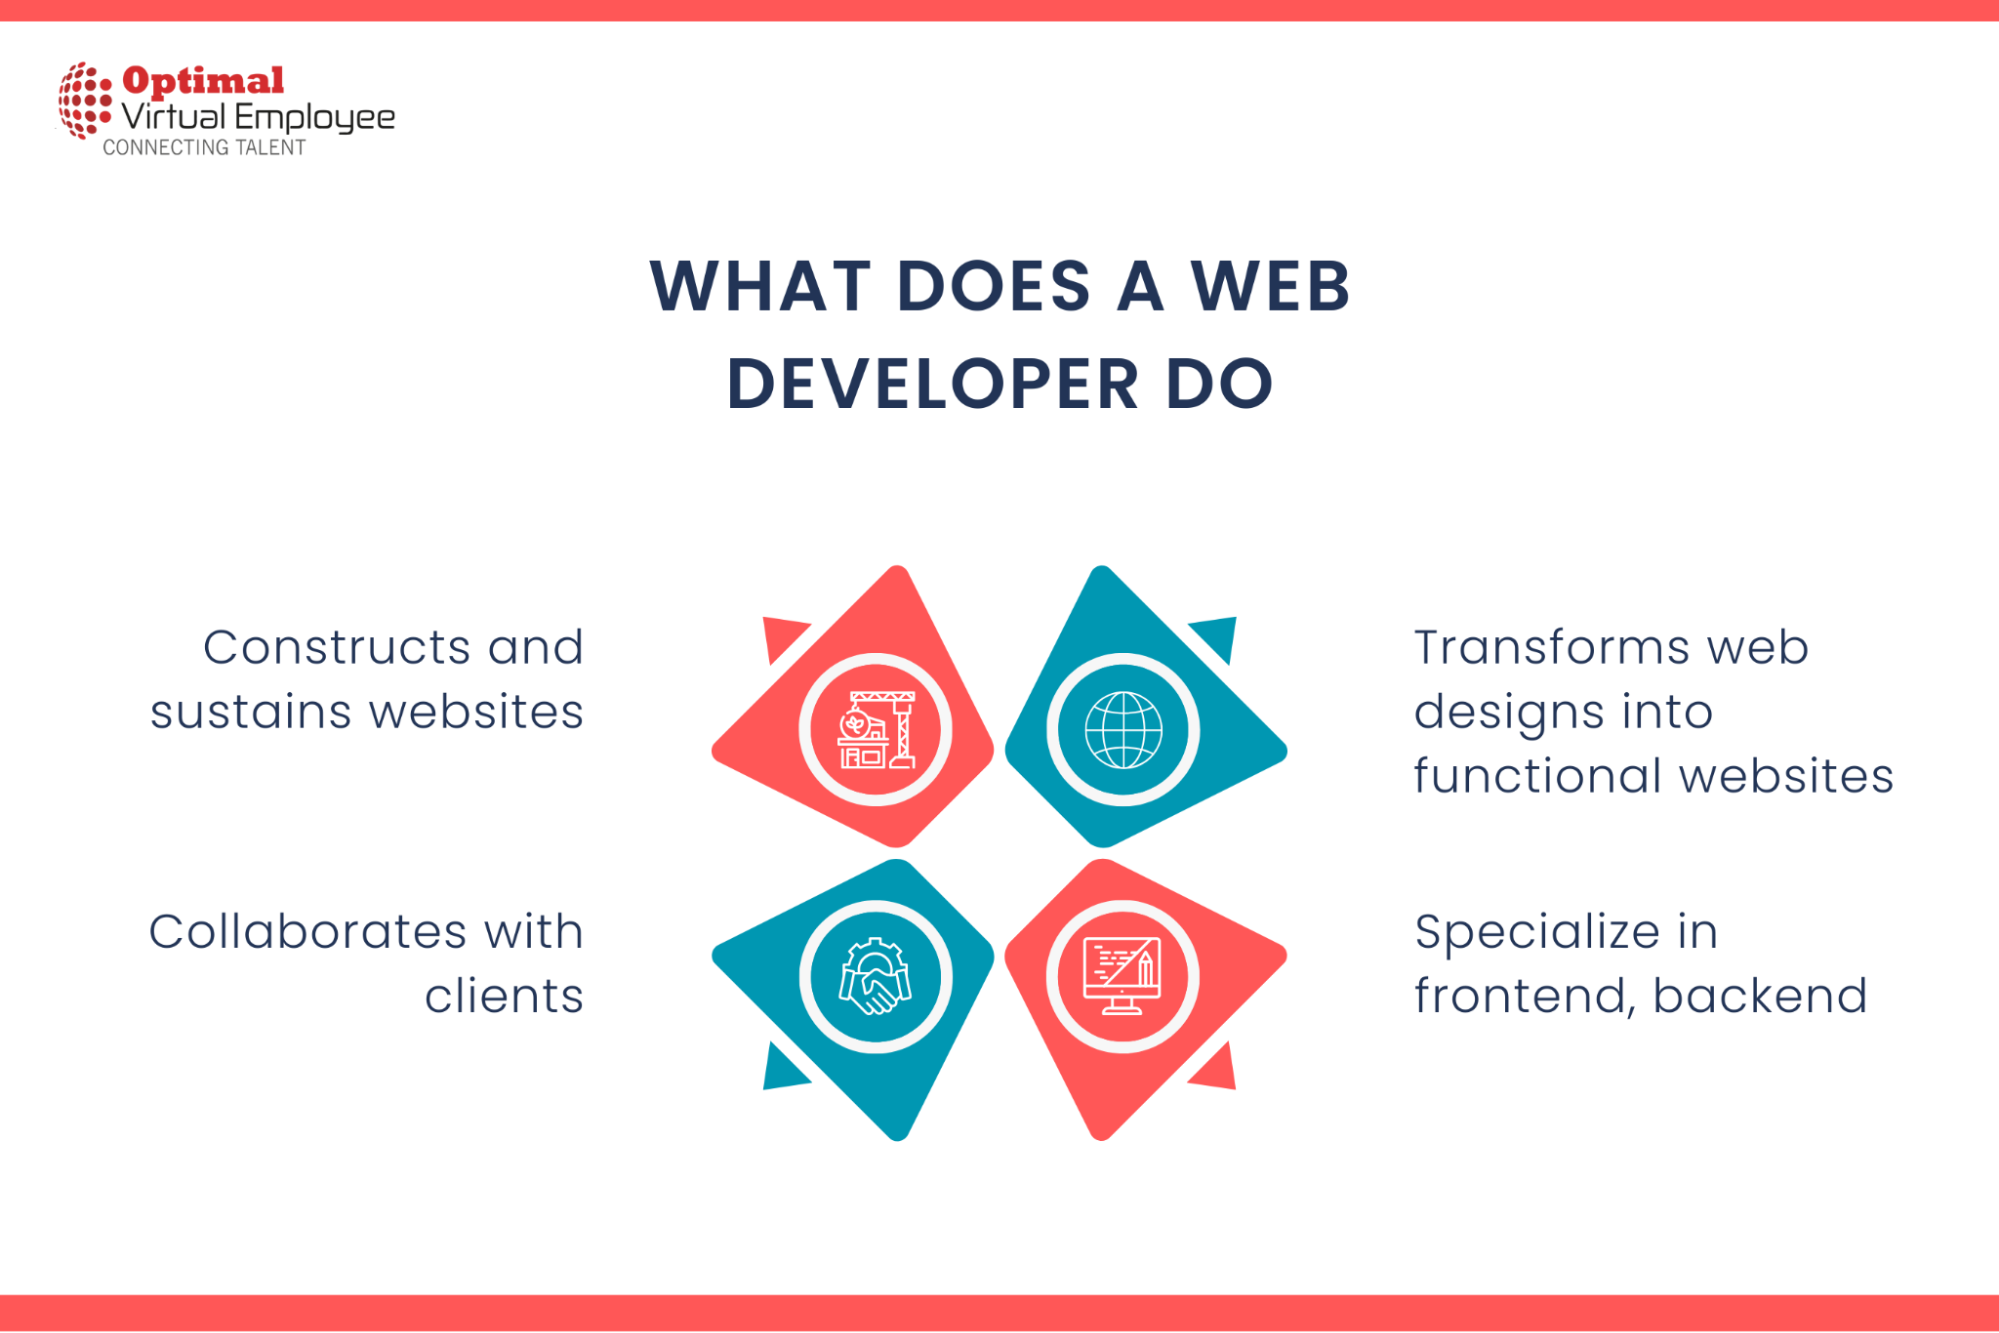 What does a web developer do